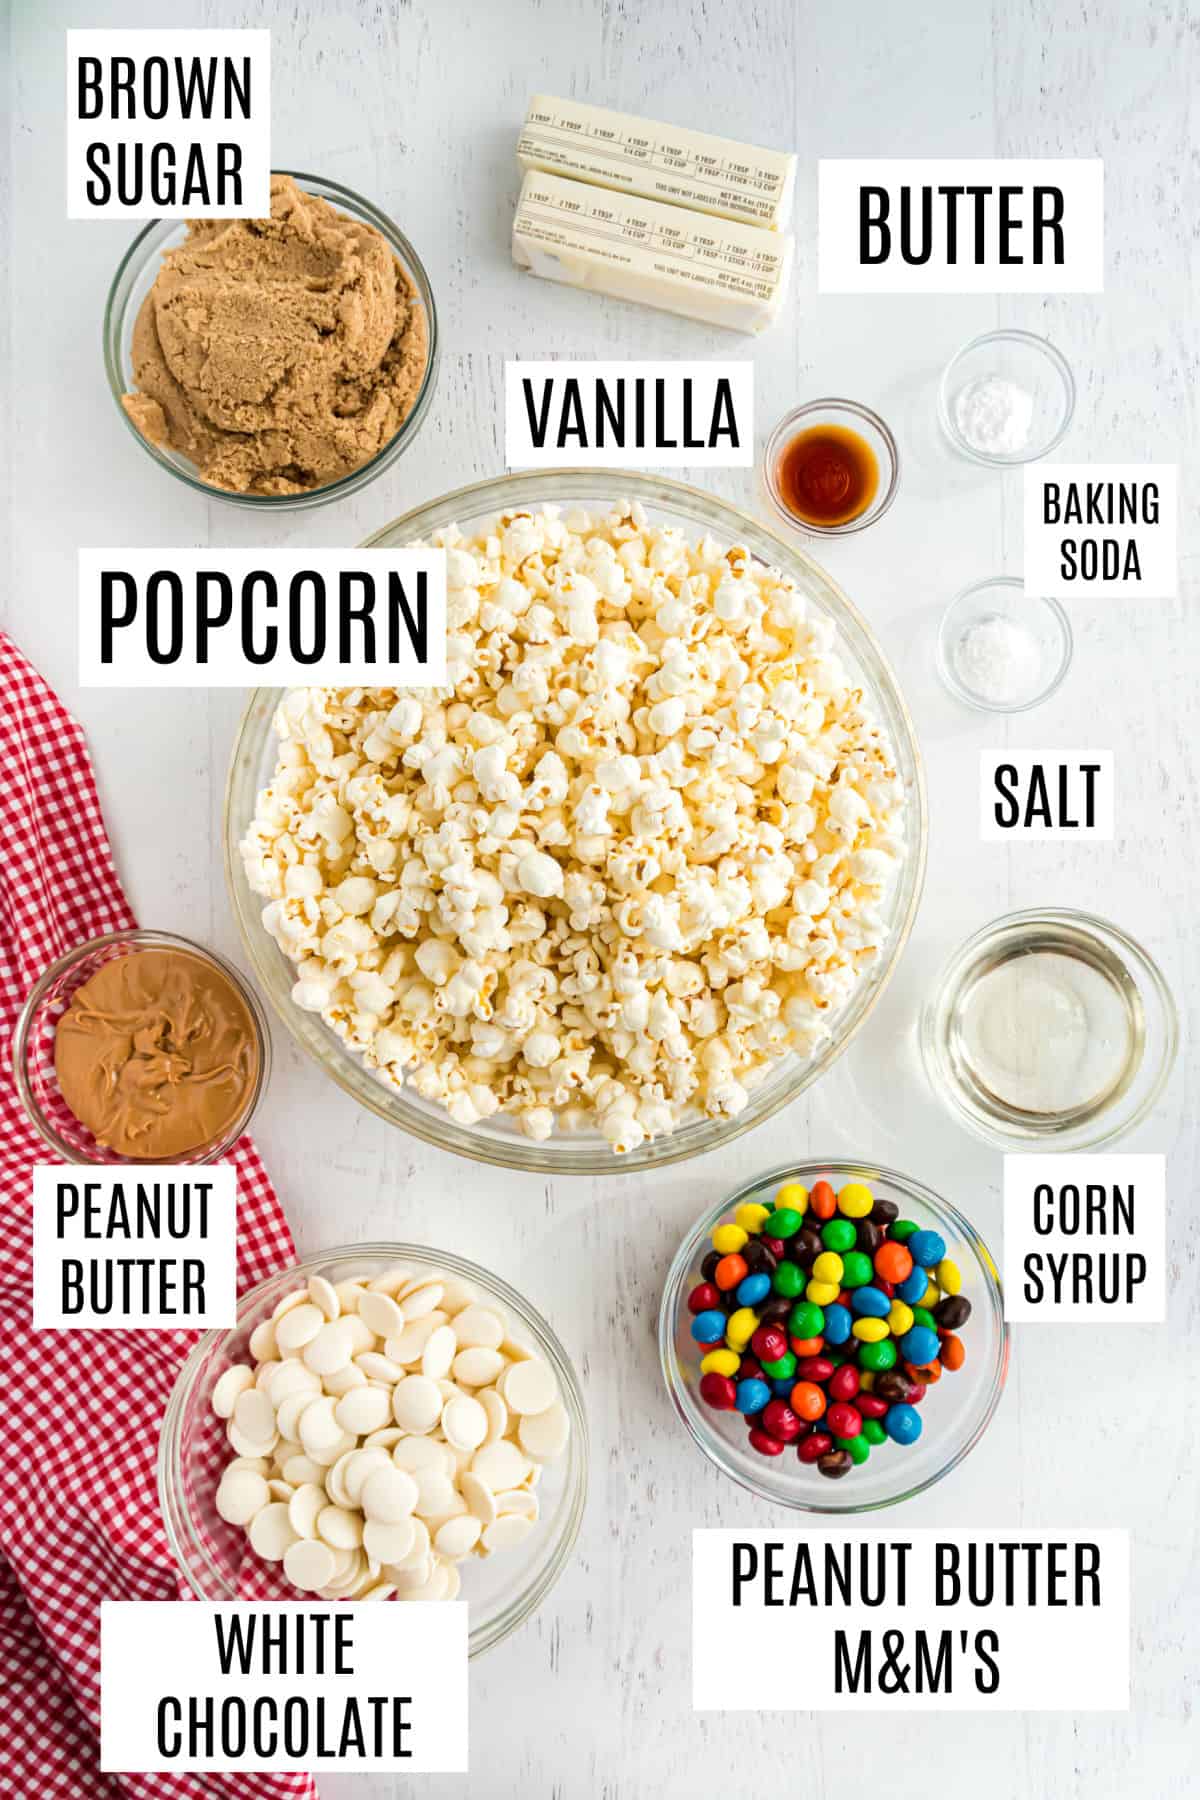 Ingredients needed to make peanut butter caramel corn.